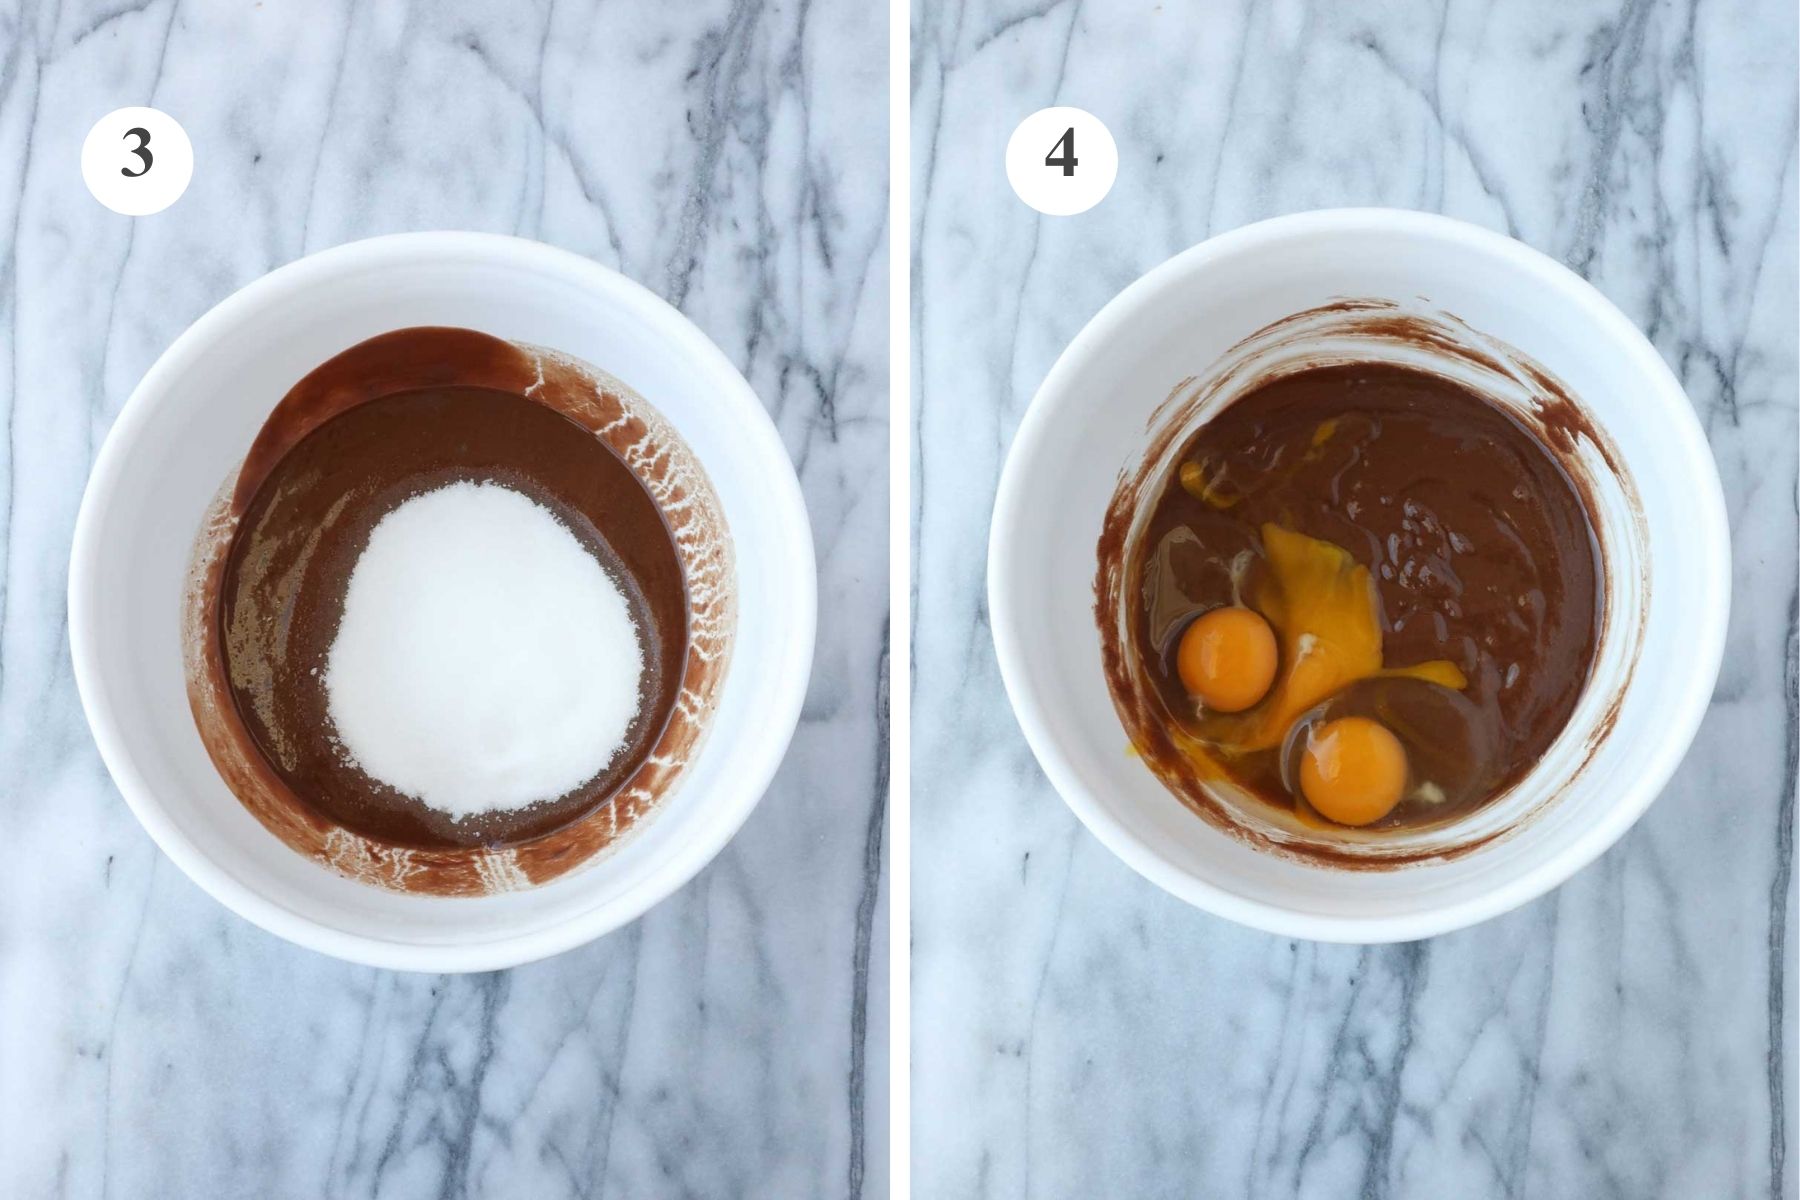 Bowl with melted chocolate and butter with sugar added, next to bowl with ingredients combined and eggs.